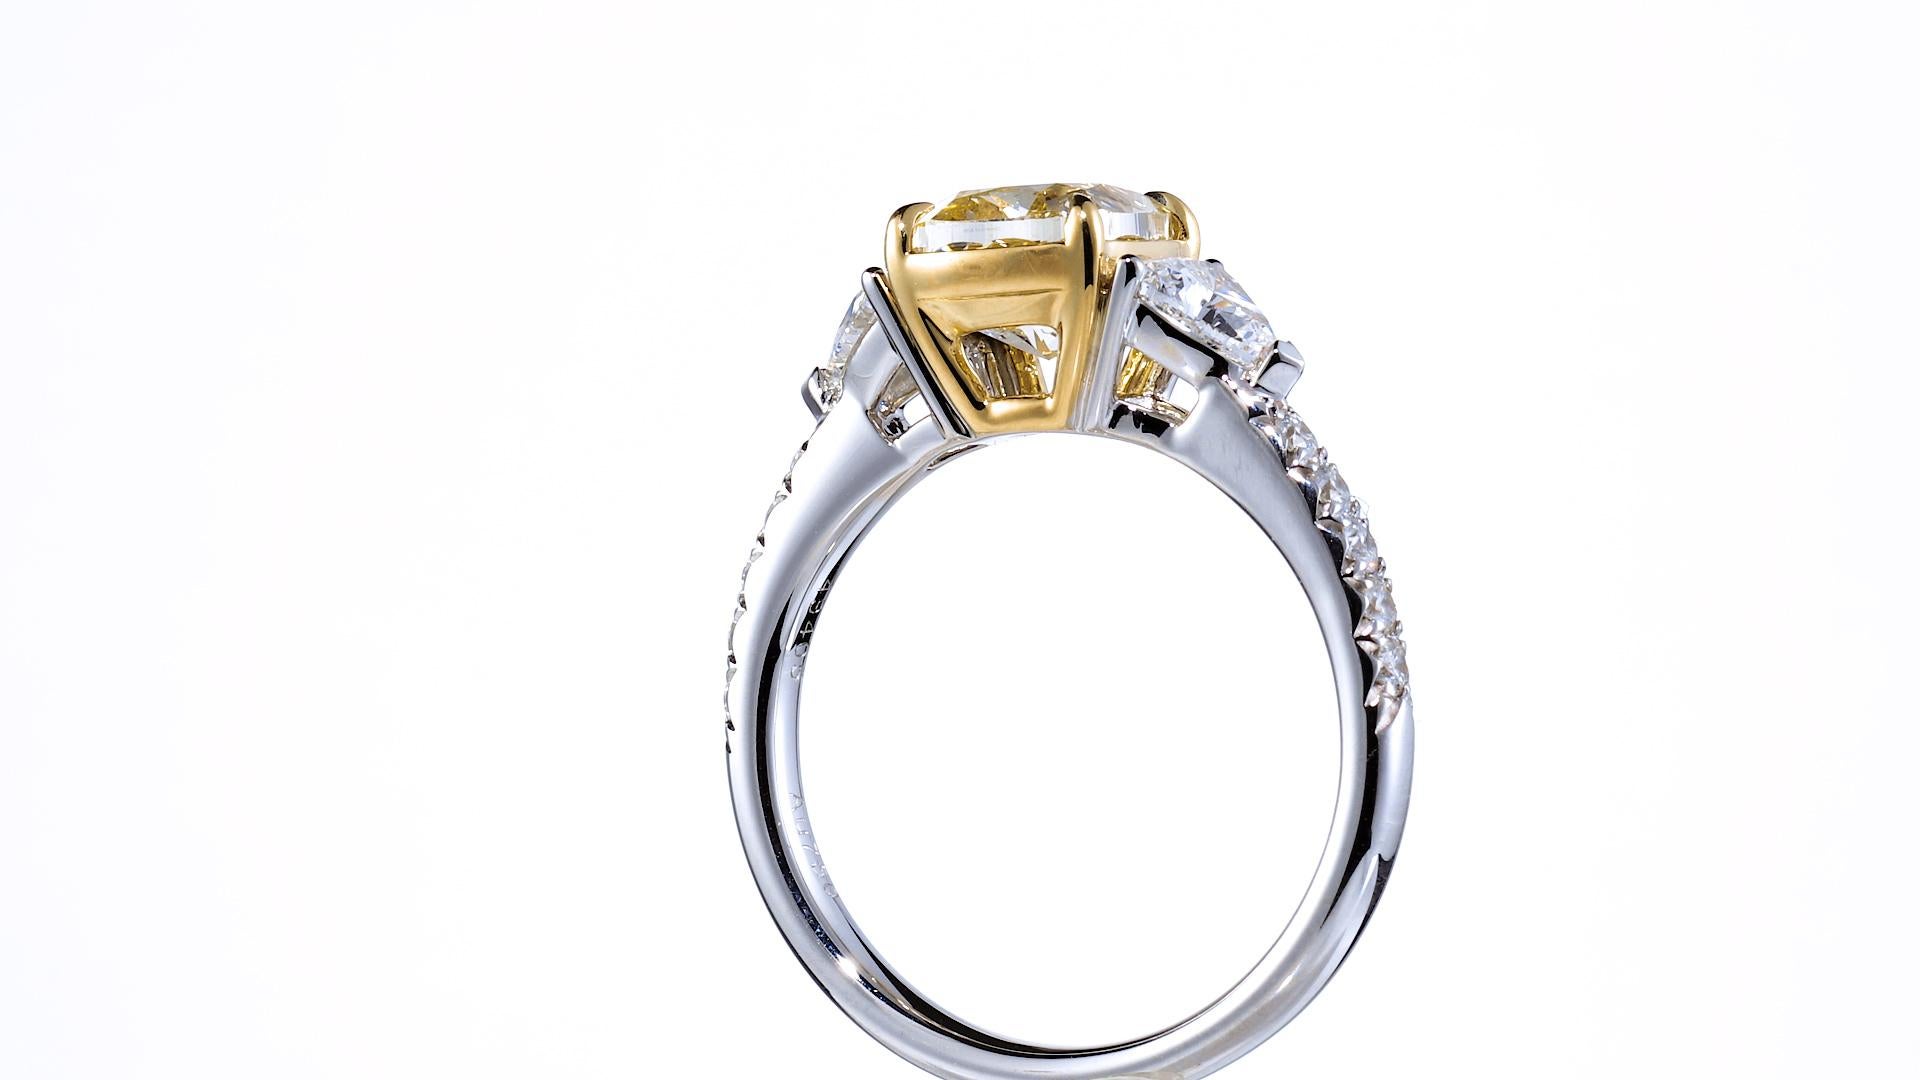 GIA Certified 2.03ct Cushion Cut Natural Fancy Light Yellow Diamond Ring 18KT. For Sale 1